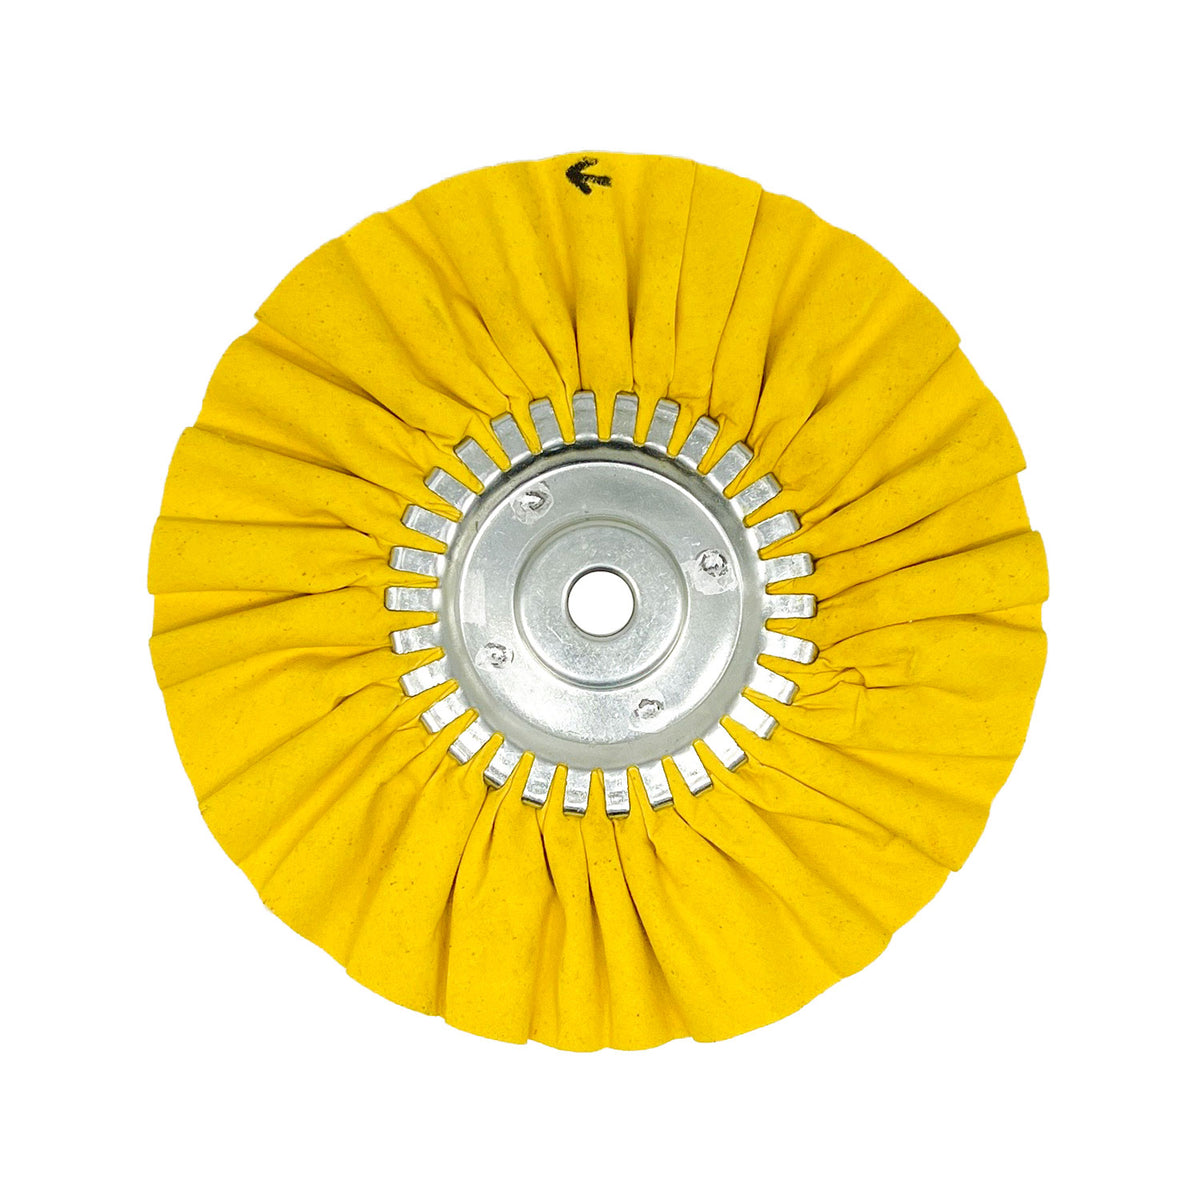 Renegade Products USA yellow airway buffing wheel with center plate, ideal for achieving a smooth and polished finish on various surfaces